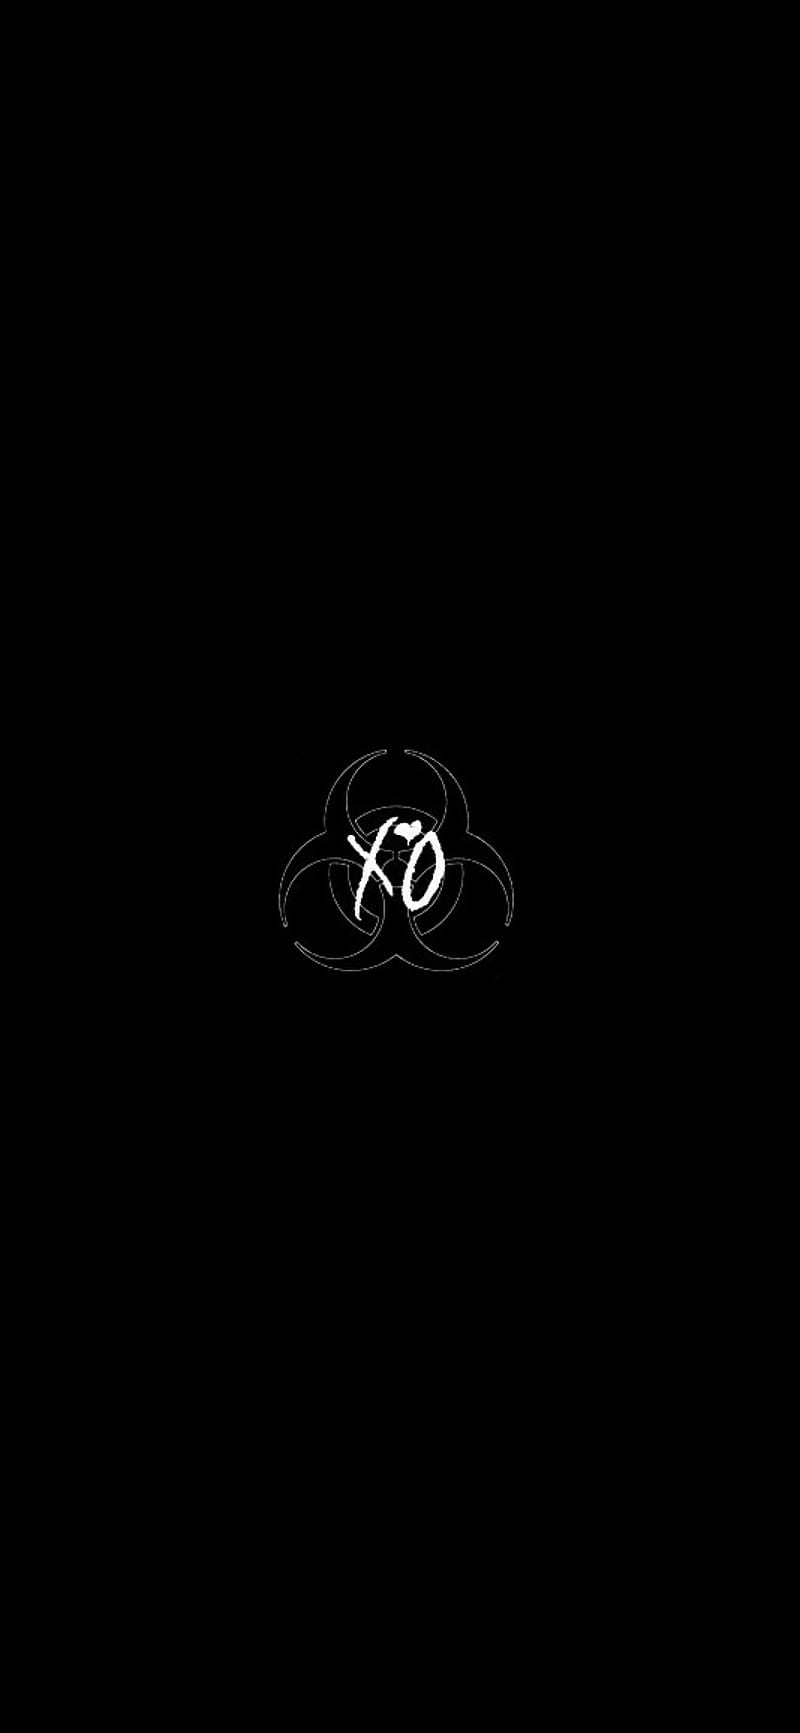 xo //the weeknd iphone wallpaper | The weeknd wallpaper iphone, The weeknd  background, The weeknd album cover